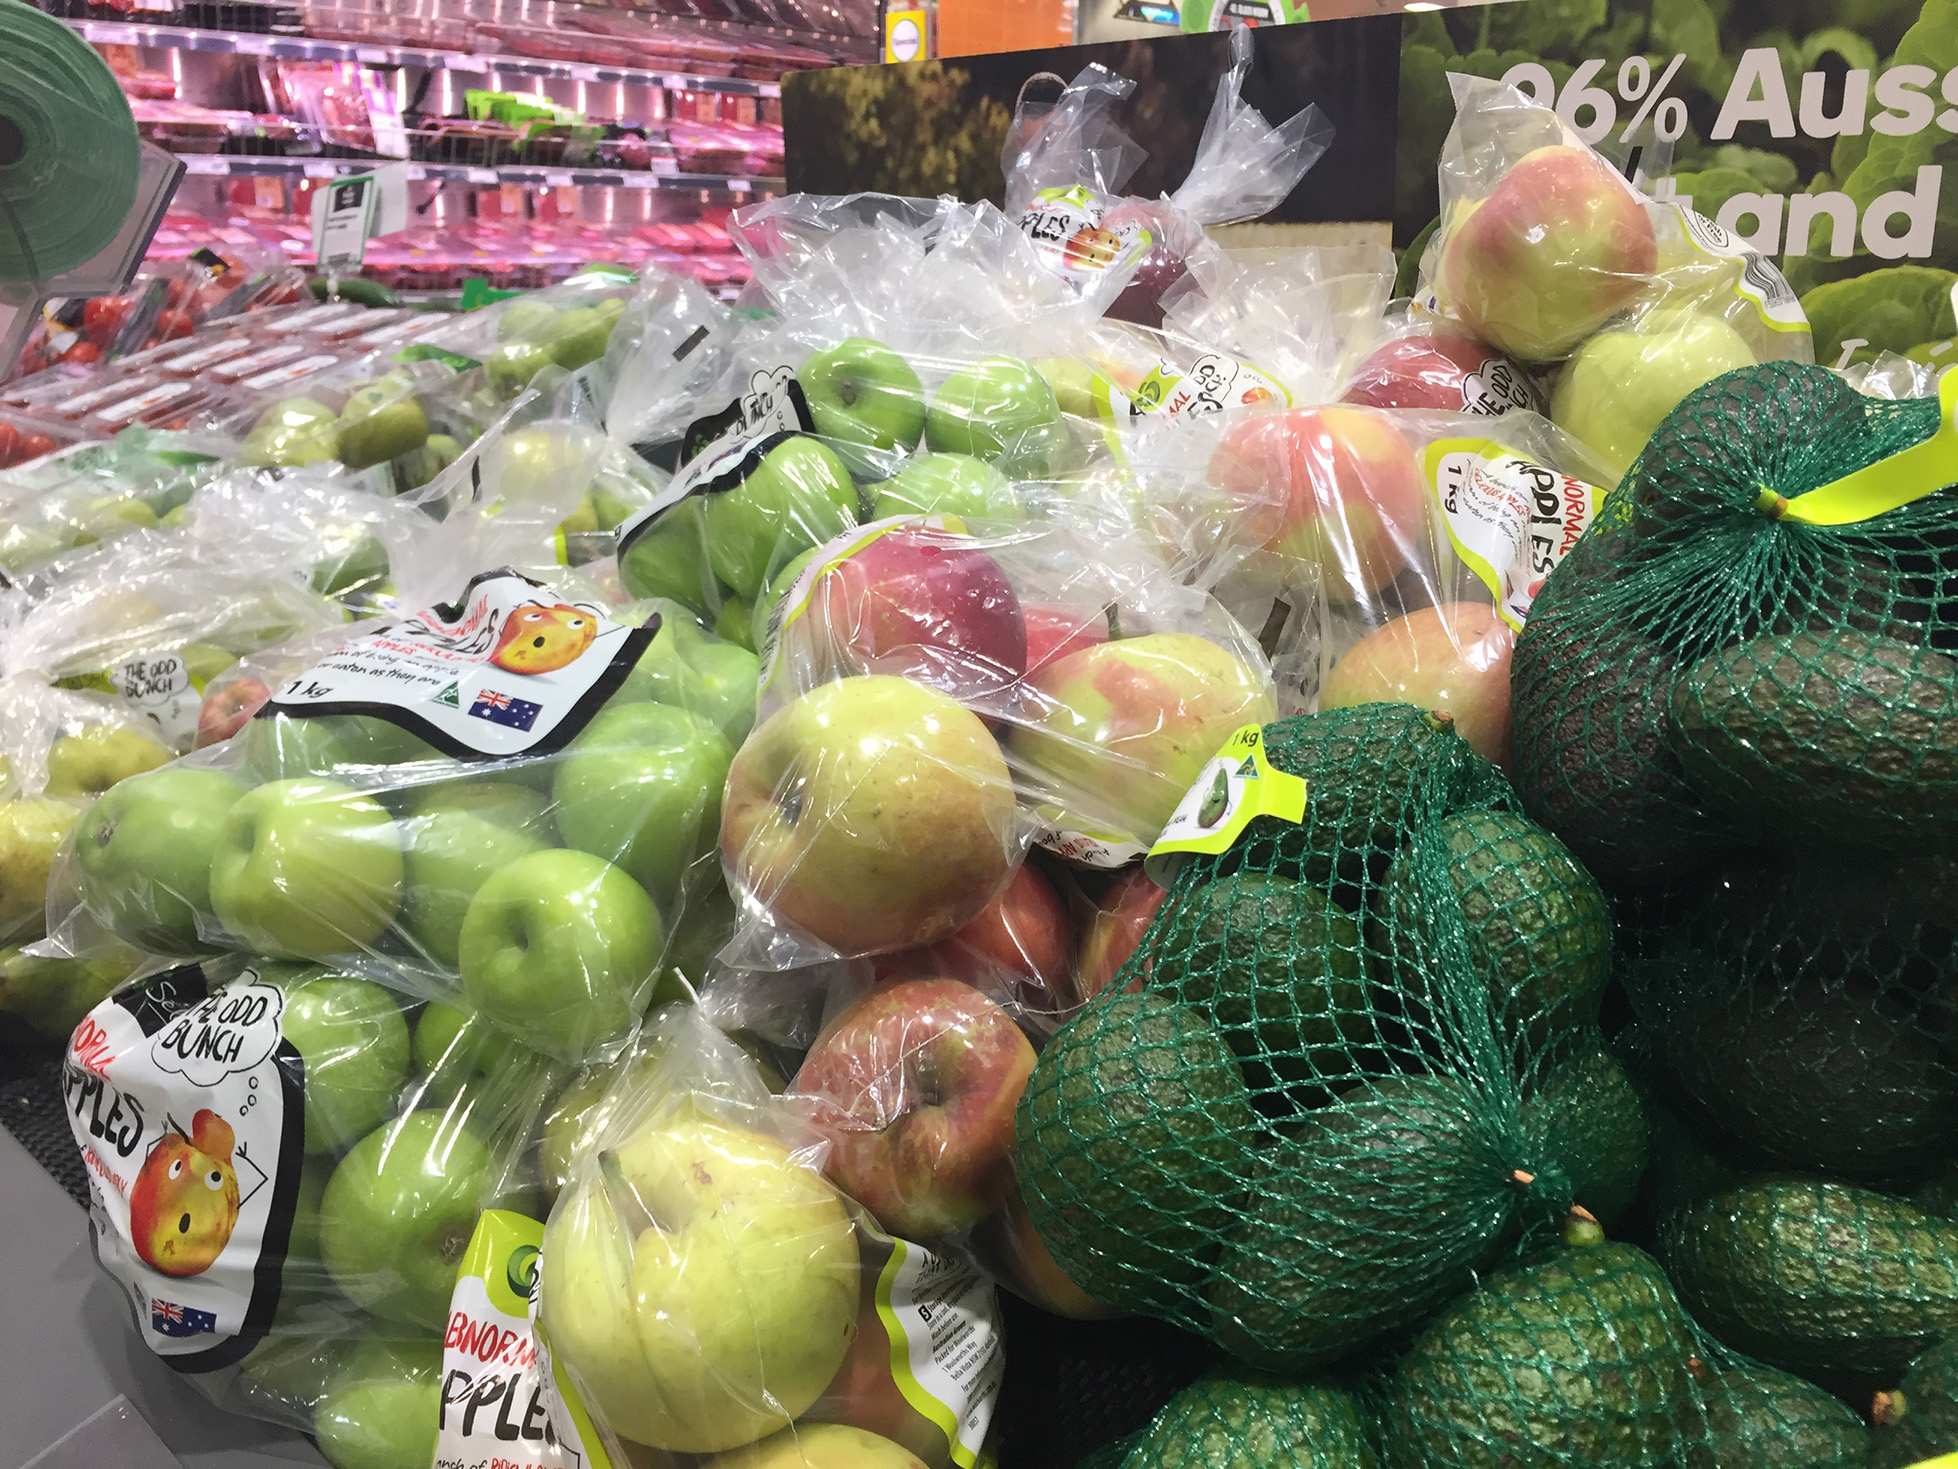 Bunches of apples and avocados wrapped in plastic and fruit netting in the supermarket